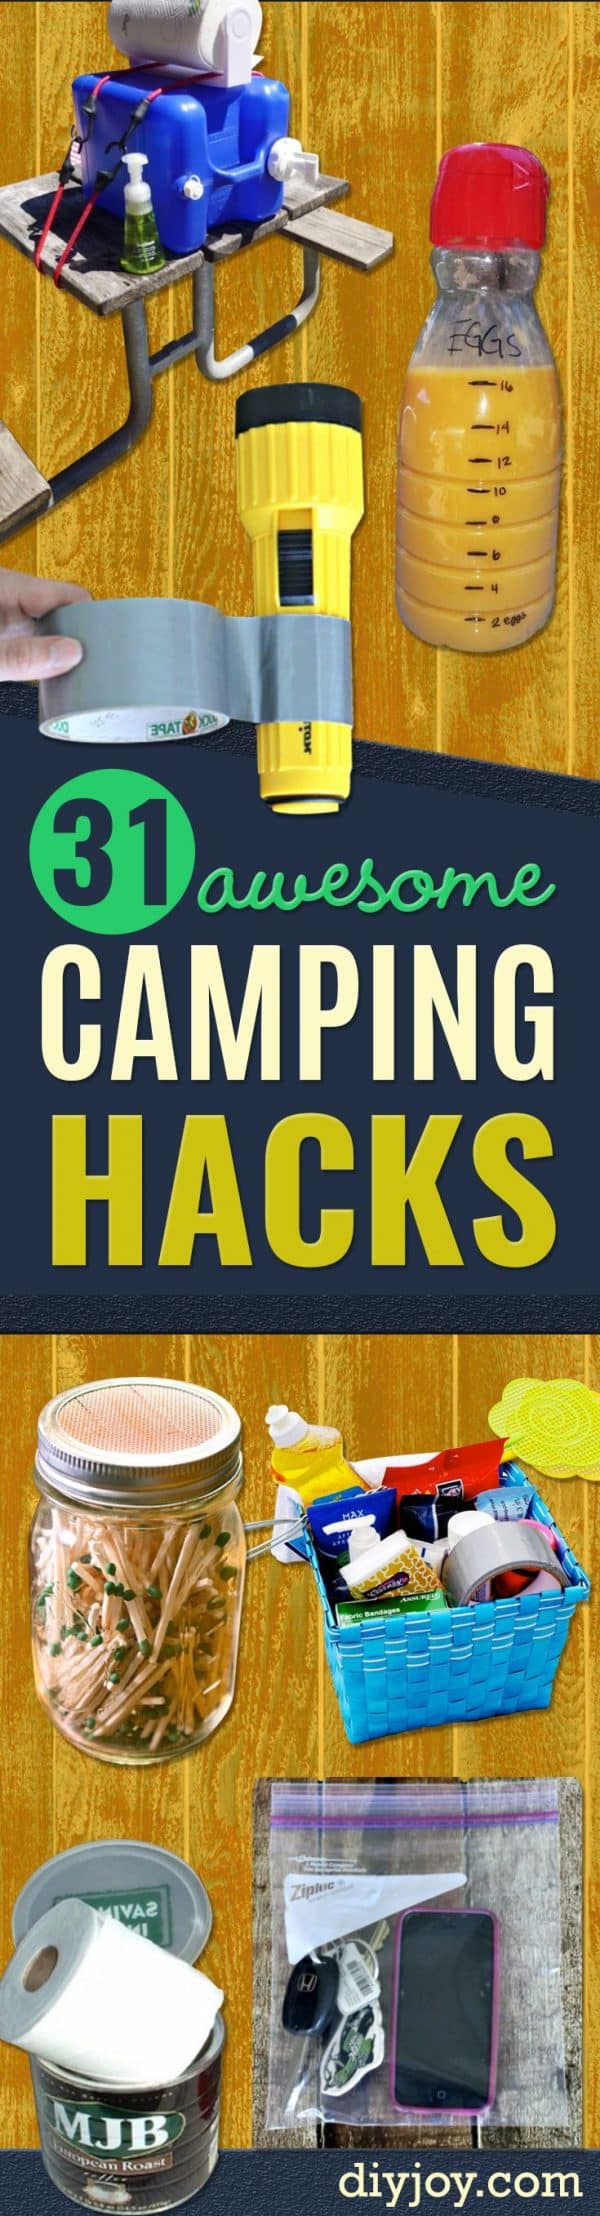 diy camping hacks- Easy DIY Camp Tips and Tricks, Recipes for Camping - Gear Ideas, Cheap Camping Supplies, Tutorials for Making Quick Camping Food, Fire Starters, Gear Holders